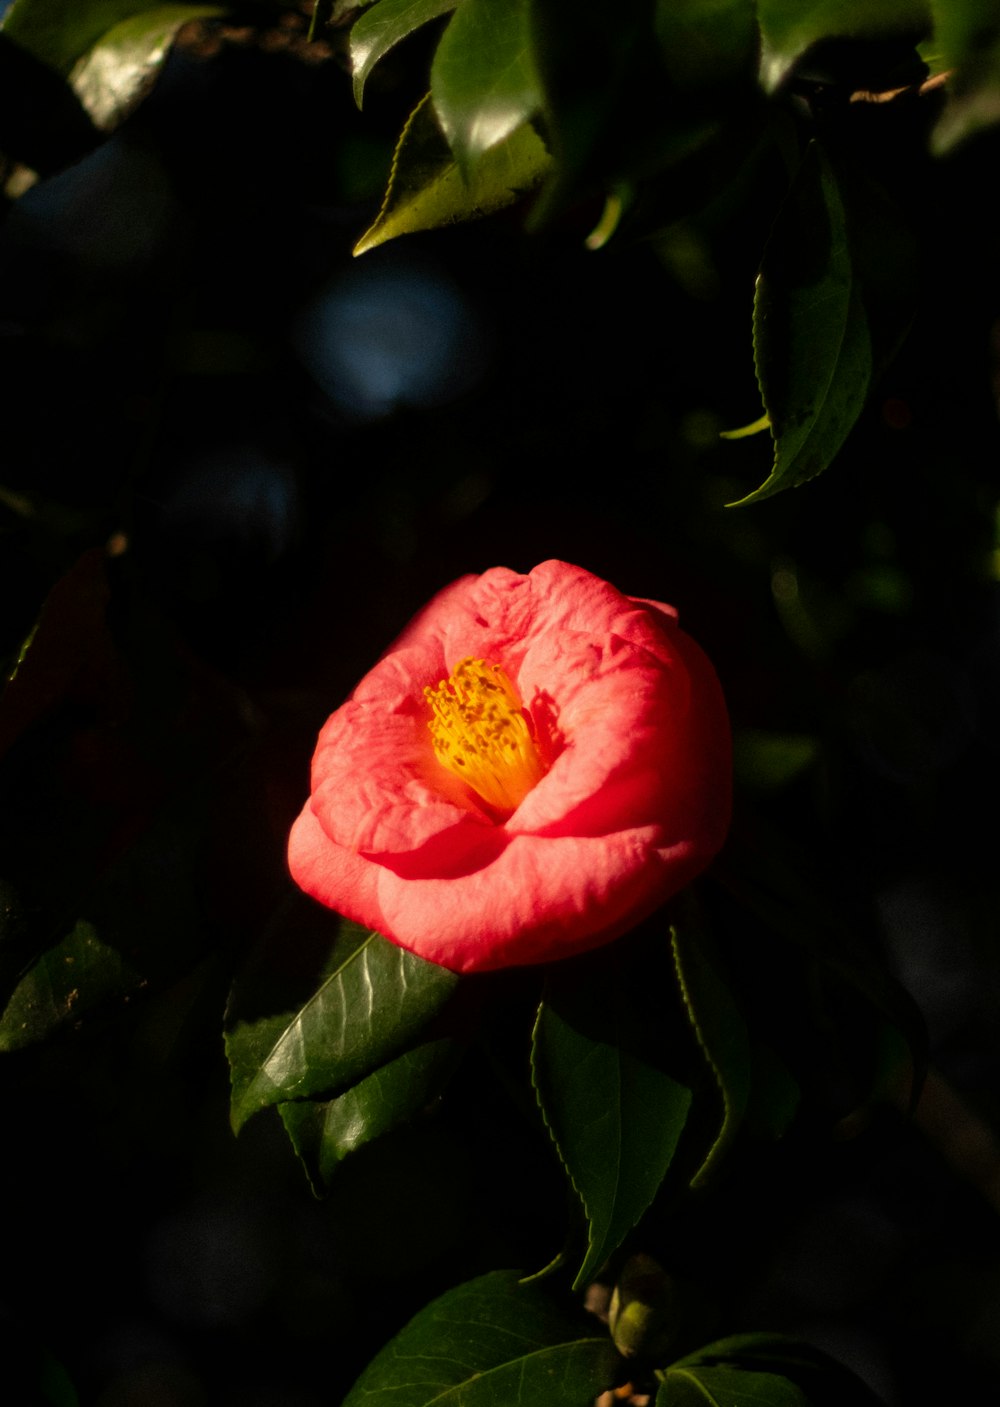 a red flower with a yellow center on a tree